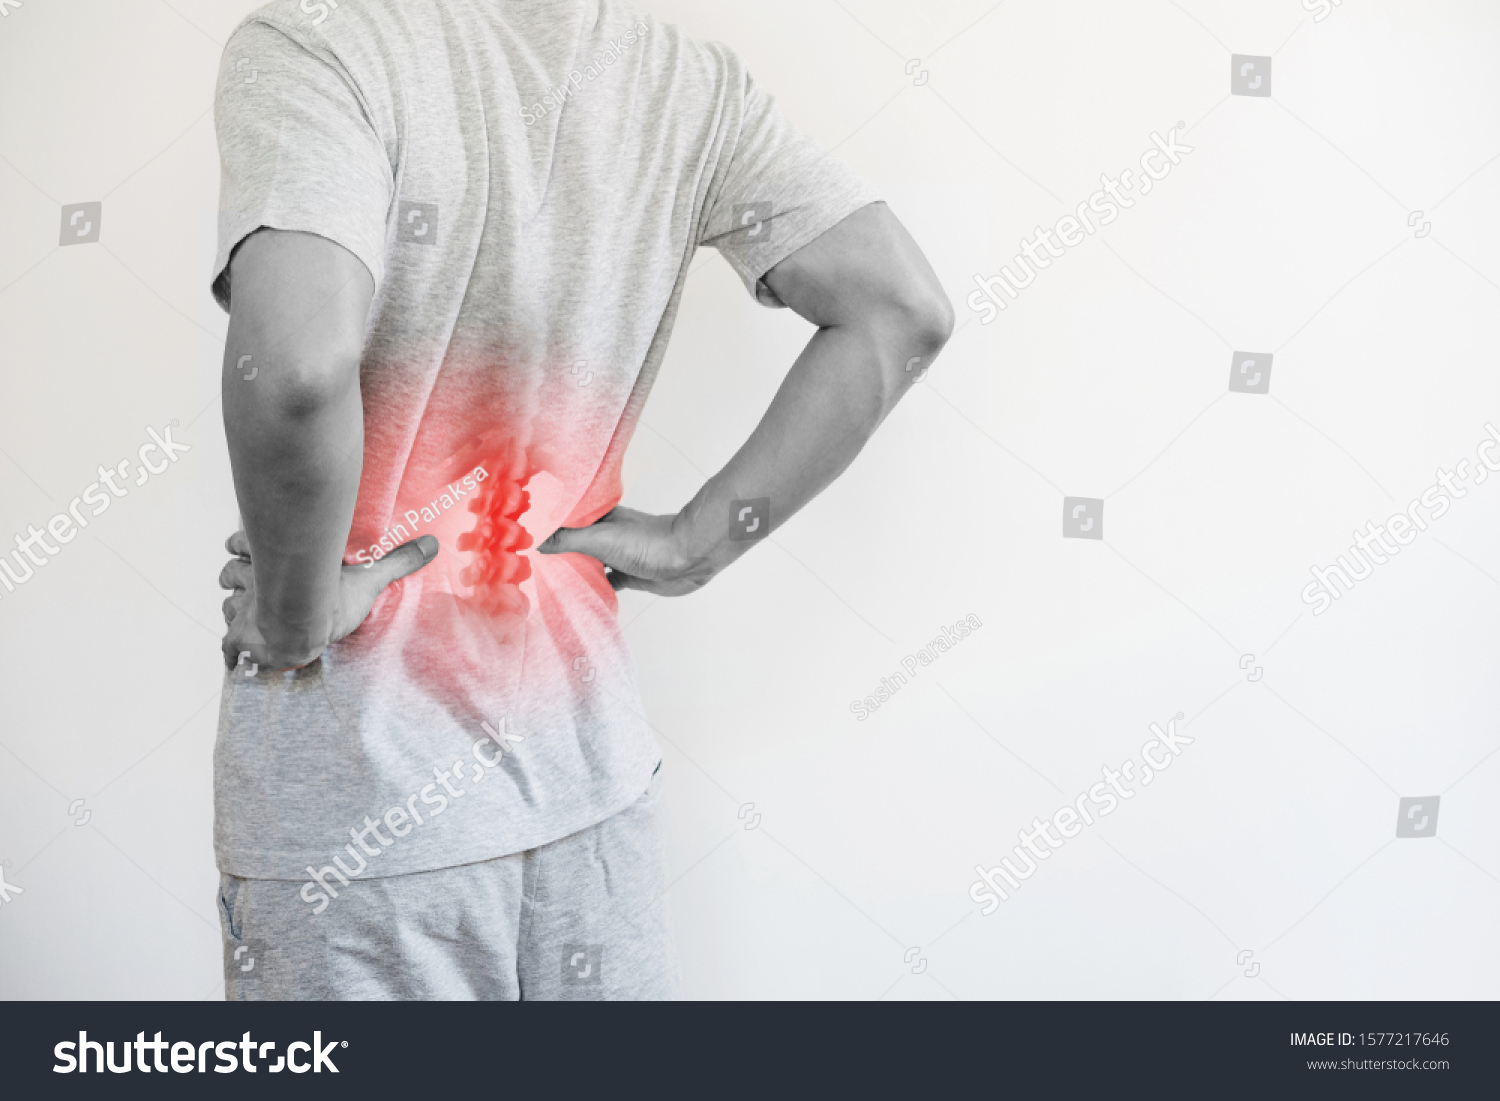 Office syndrome, Backache and Lower Back Pain Concept. a man touching his lower back at pain point #1577217646